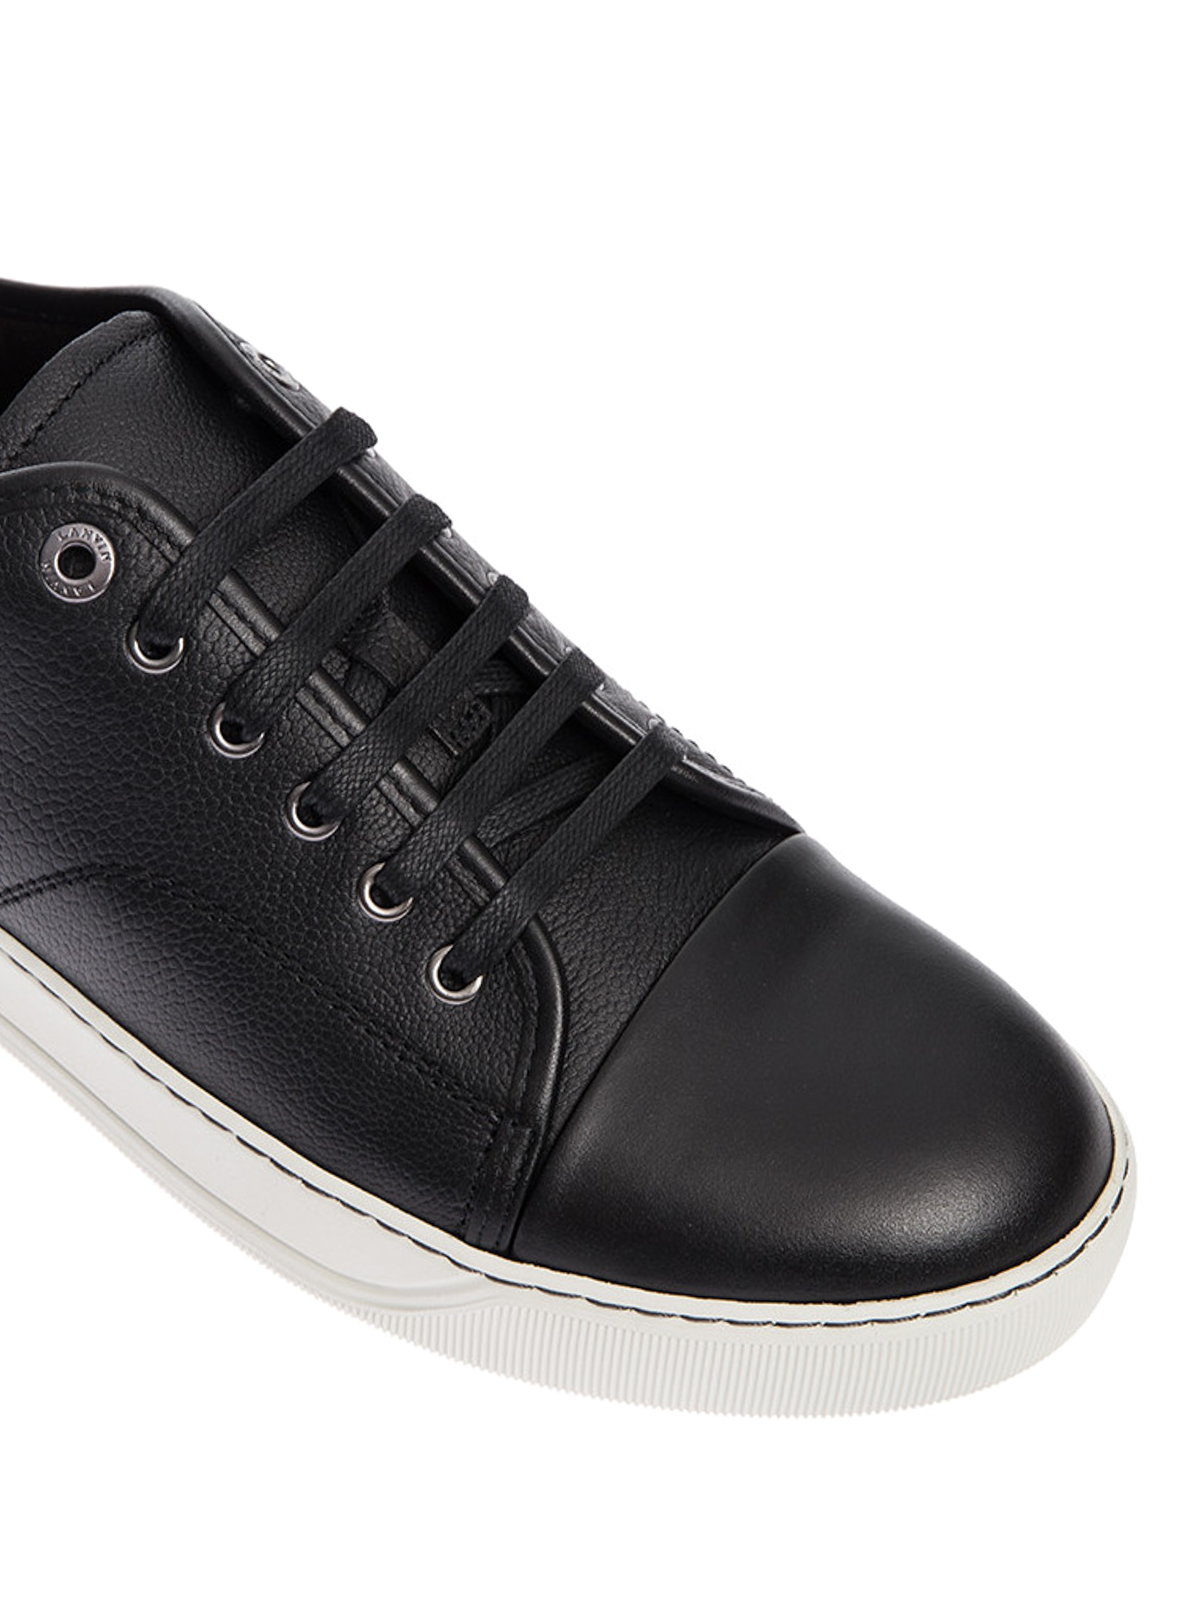 Mens Shoes Trainers Low-top trainers Lanvin Leather Mens Dbbi1 Low Top Trainers Black for Men 